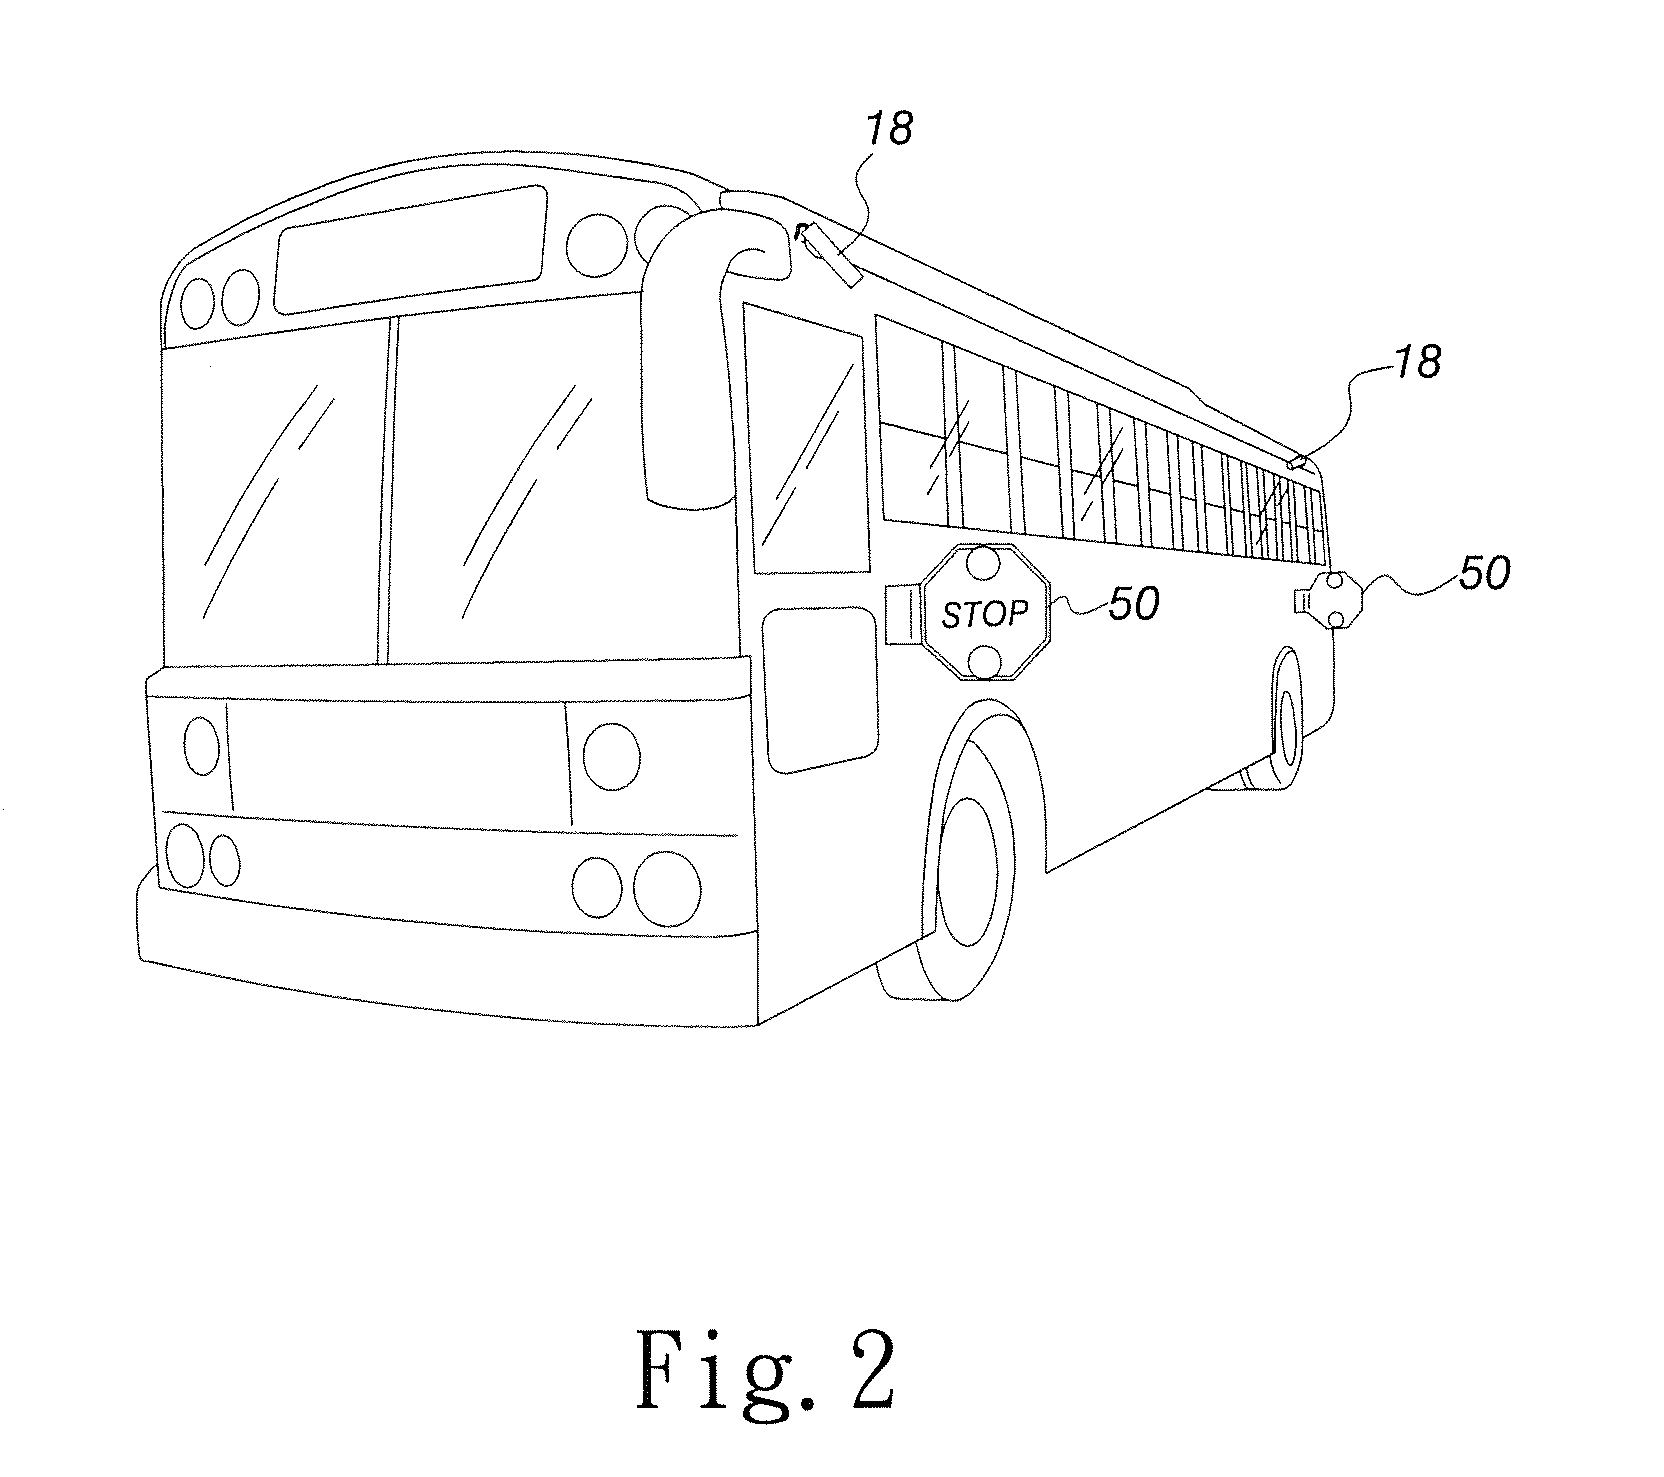 Automatic record detection device and method for stop arm violation event